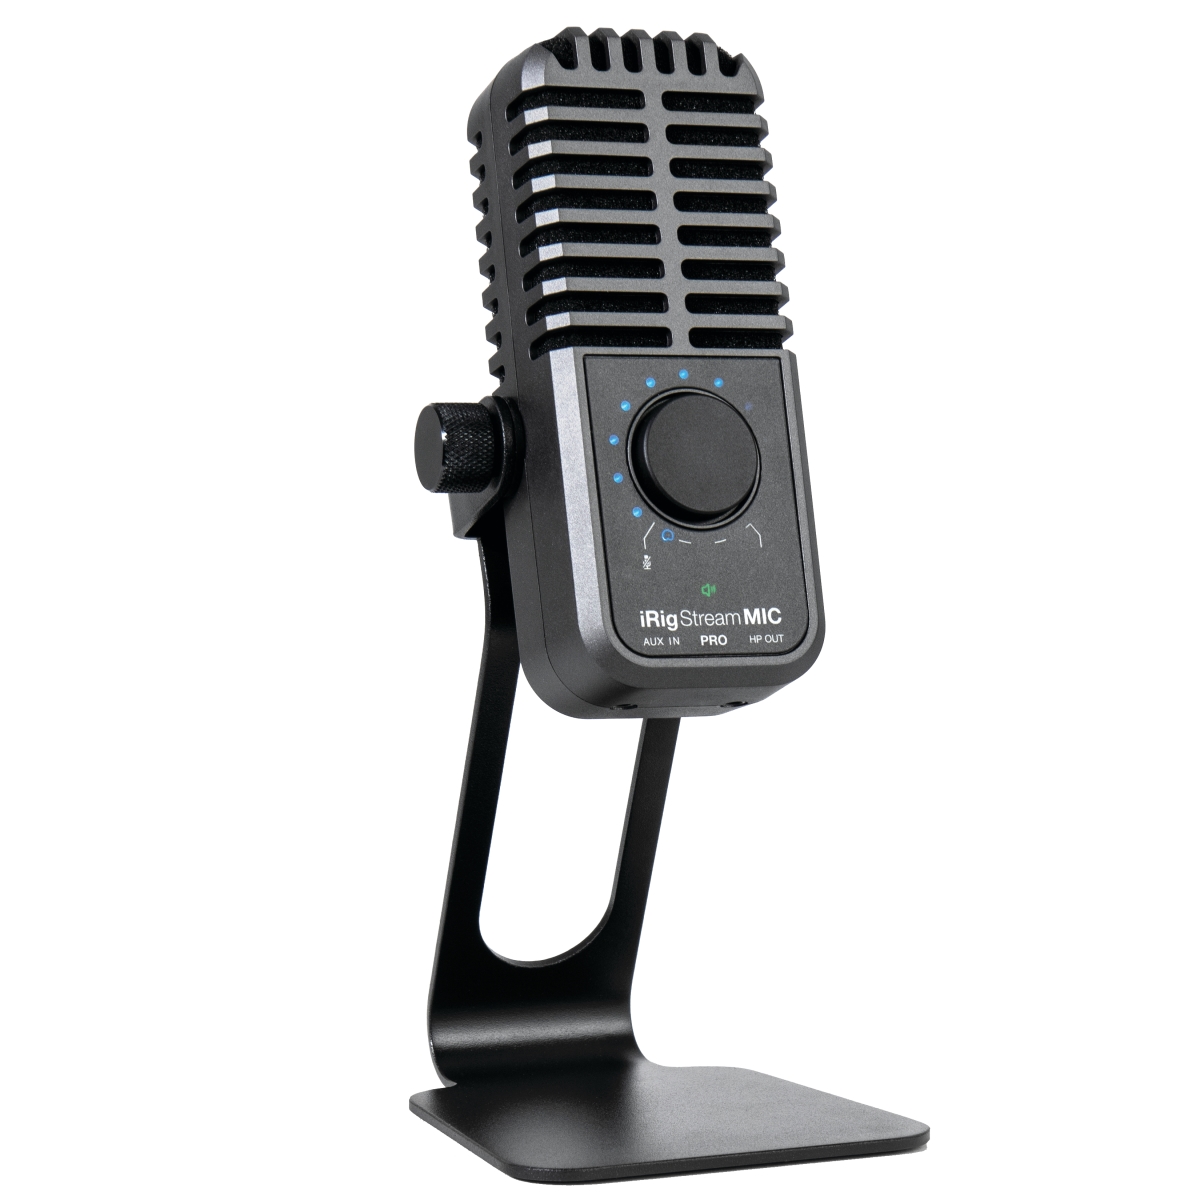 Picture of IK Hardware 1188349 Irig Stream Pro Microphone